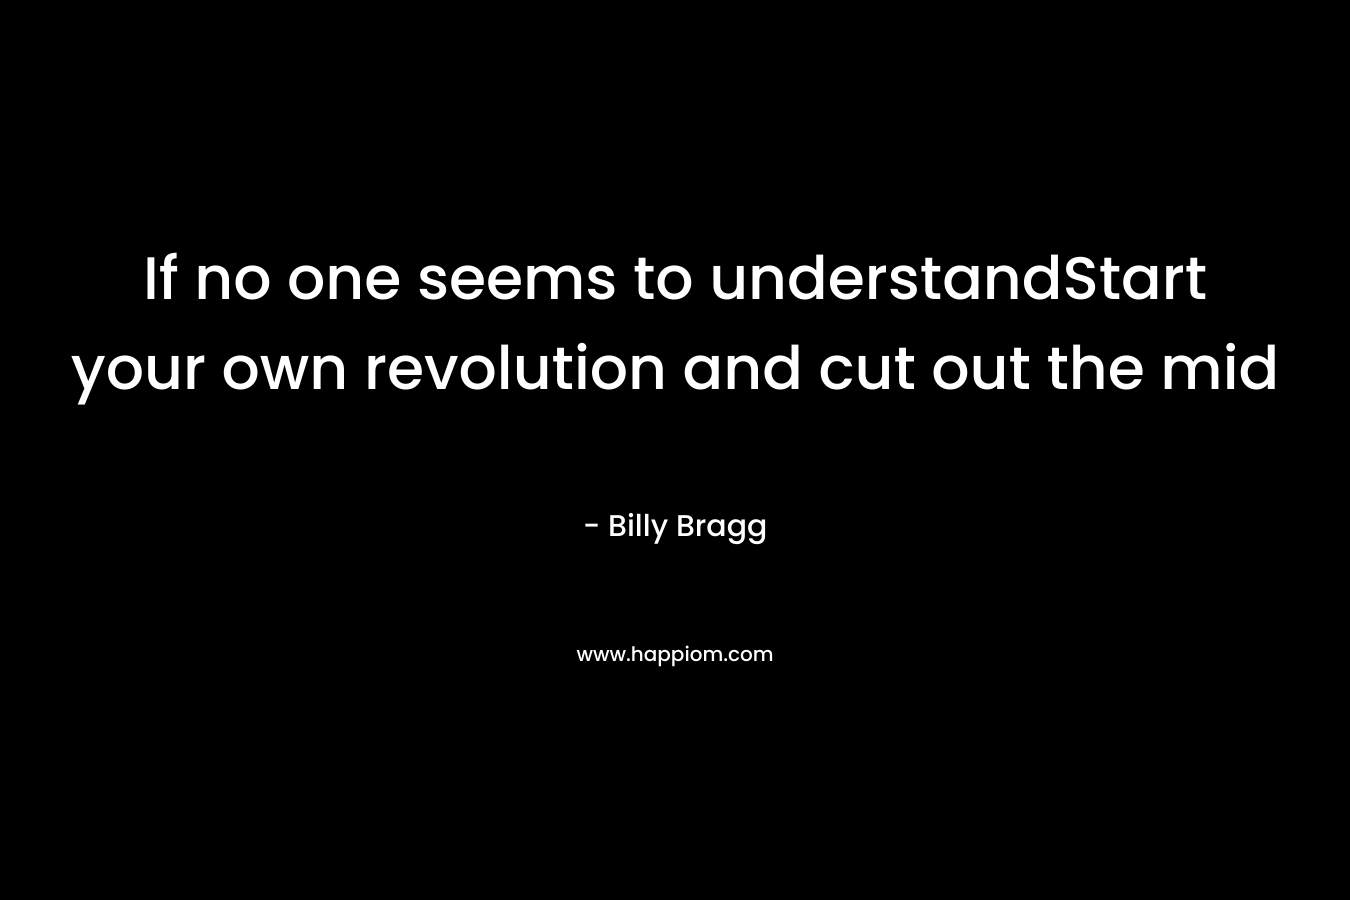 If no one seems to understandStart your own revolution and cut out the mid – Billy Bragg